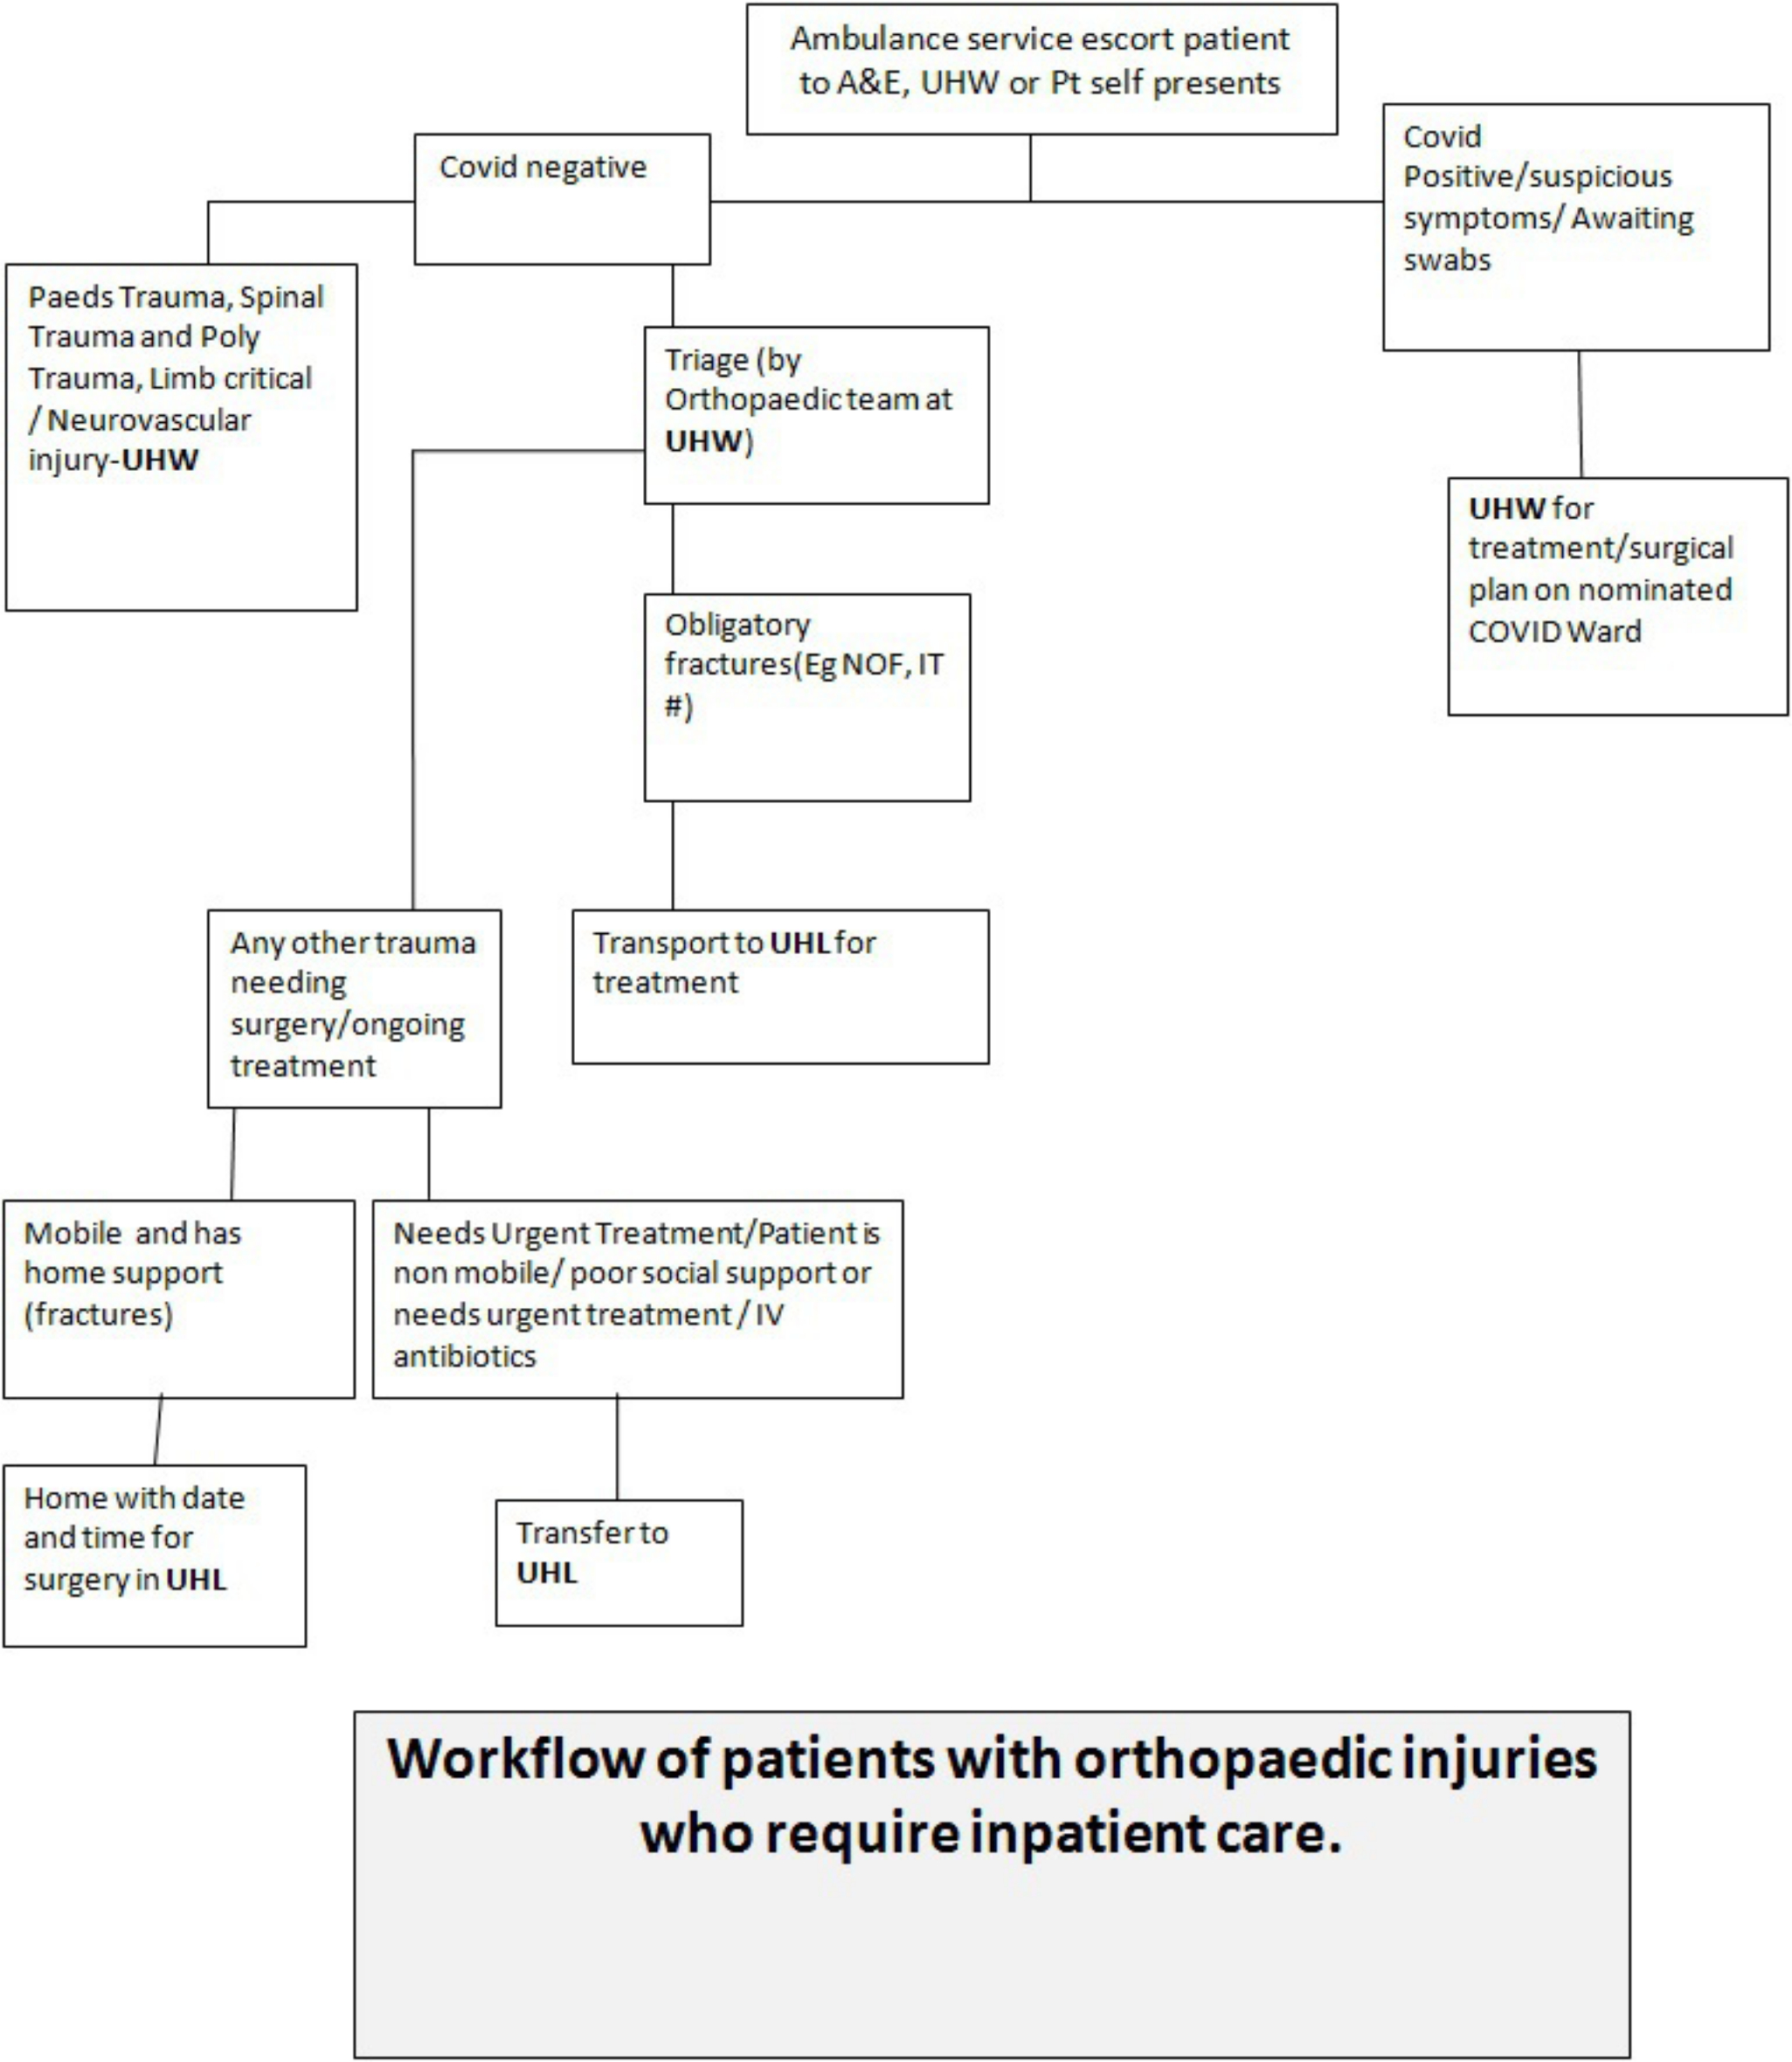 Fig. 4 
             Patients attending A&E at UHW and requiring inpatient care followed the workflow/algorithm.
          